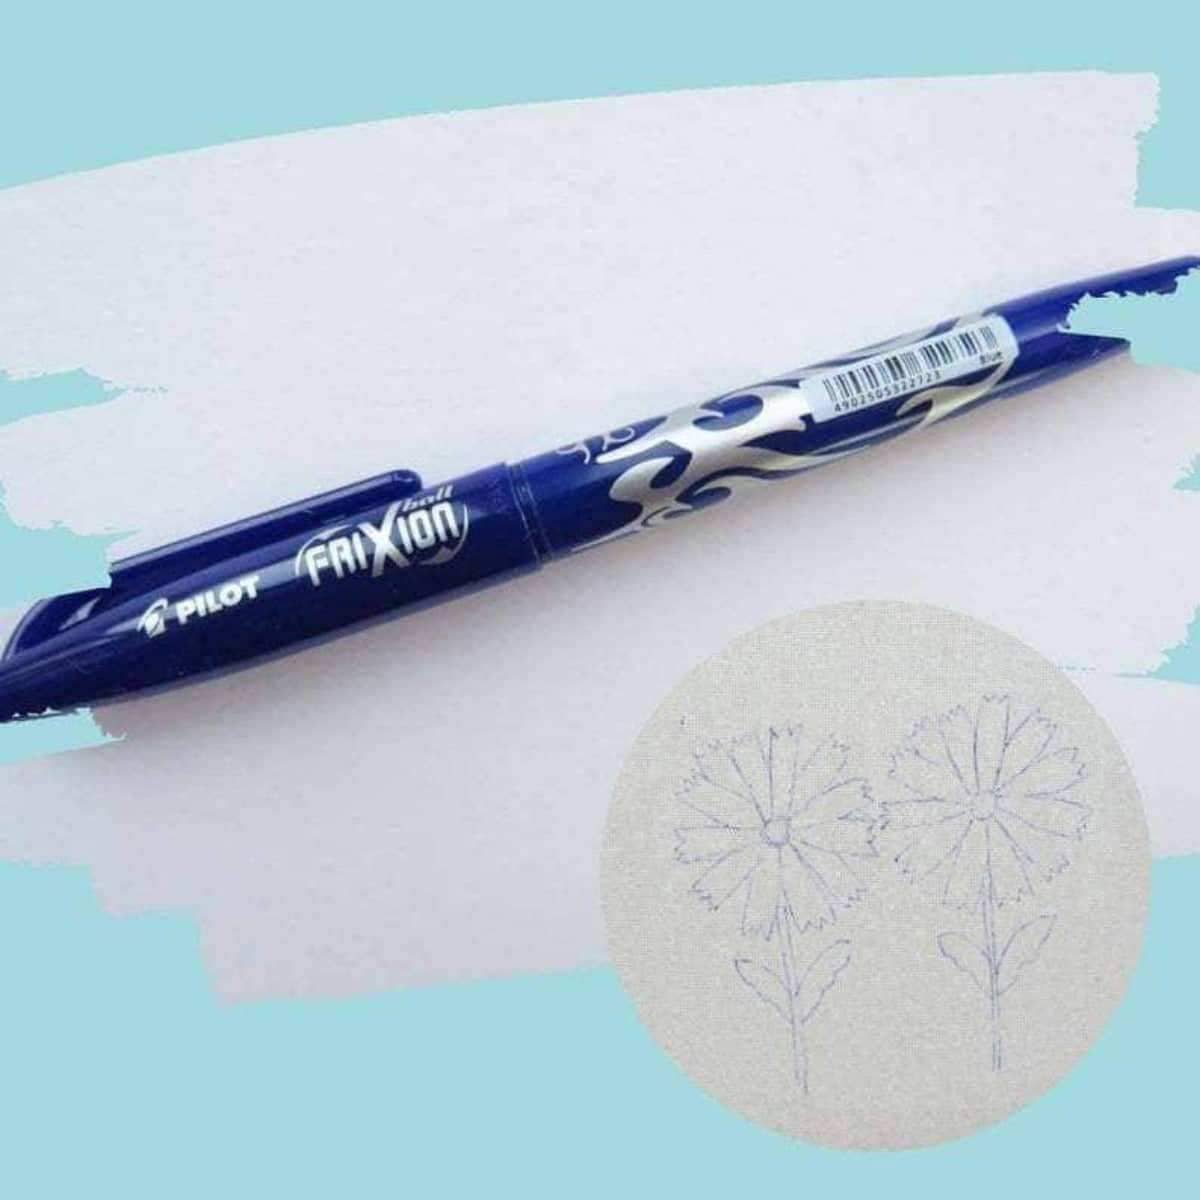 Frixion Pen, Hand Embroidery Transfer Pen , Embroidery Supplies , StitchDoodles , embroidery hoop kit, embroidery kits for adults, embroidery kits for beginners, erasable transfer pen, frixion erasable pen, hand embroidery, modern embroidery kits, pen for embroidery, transfer pen, unique embroidery kits , StitchDoodles , shop.stitchdoodles.com